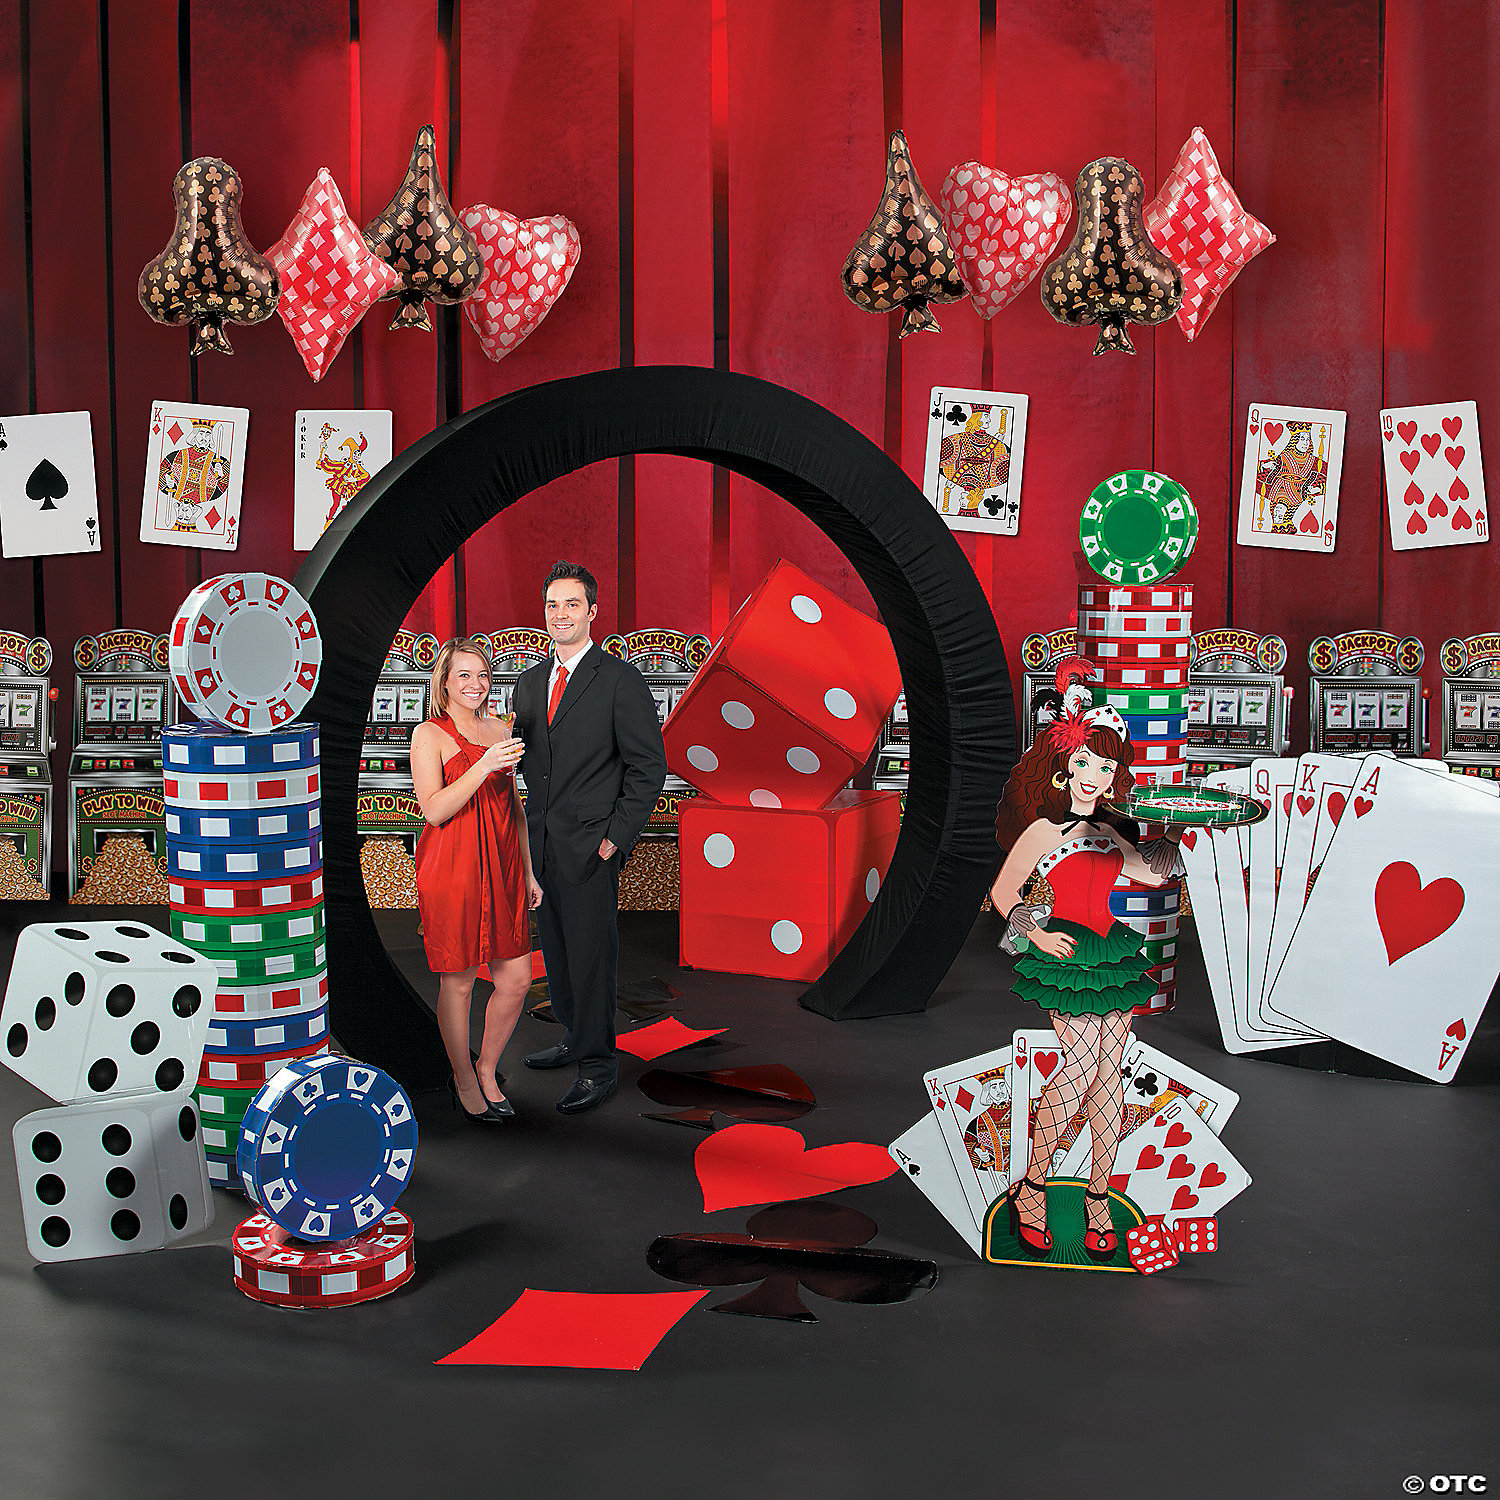 Casino Party Poker Vegas Playing Cards Hanging Decorations 